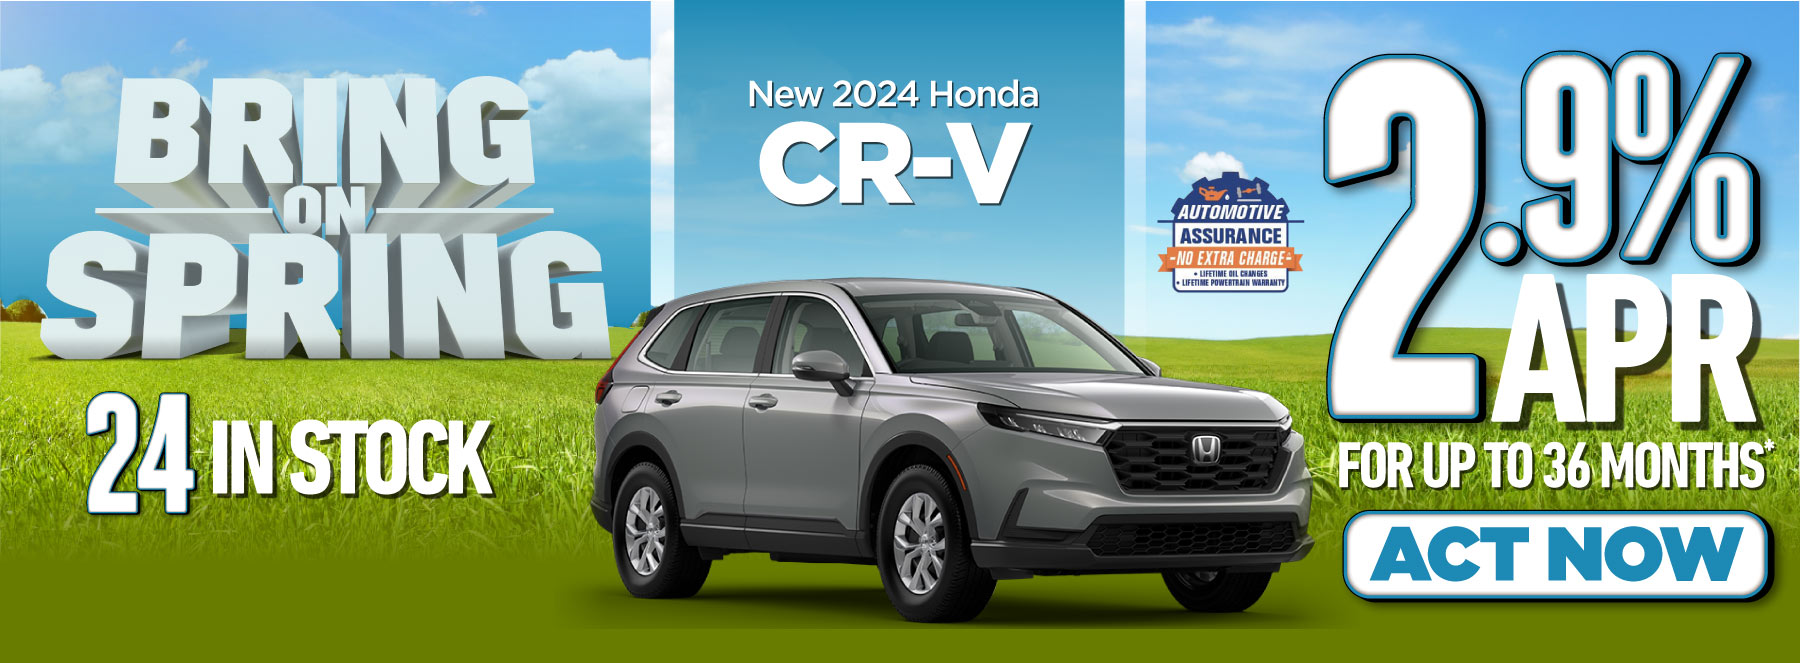 New 2024 Honda CR-V - Get 2.9% APR for up to 36 months* | Act Now